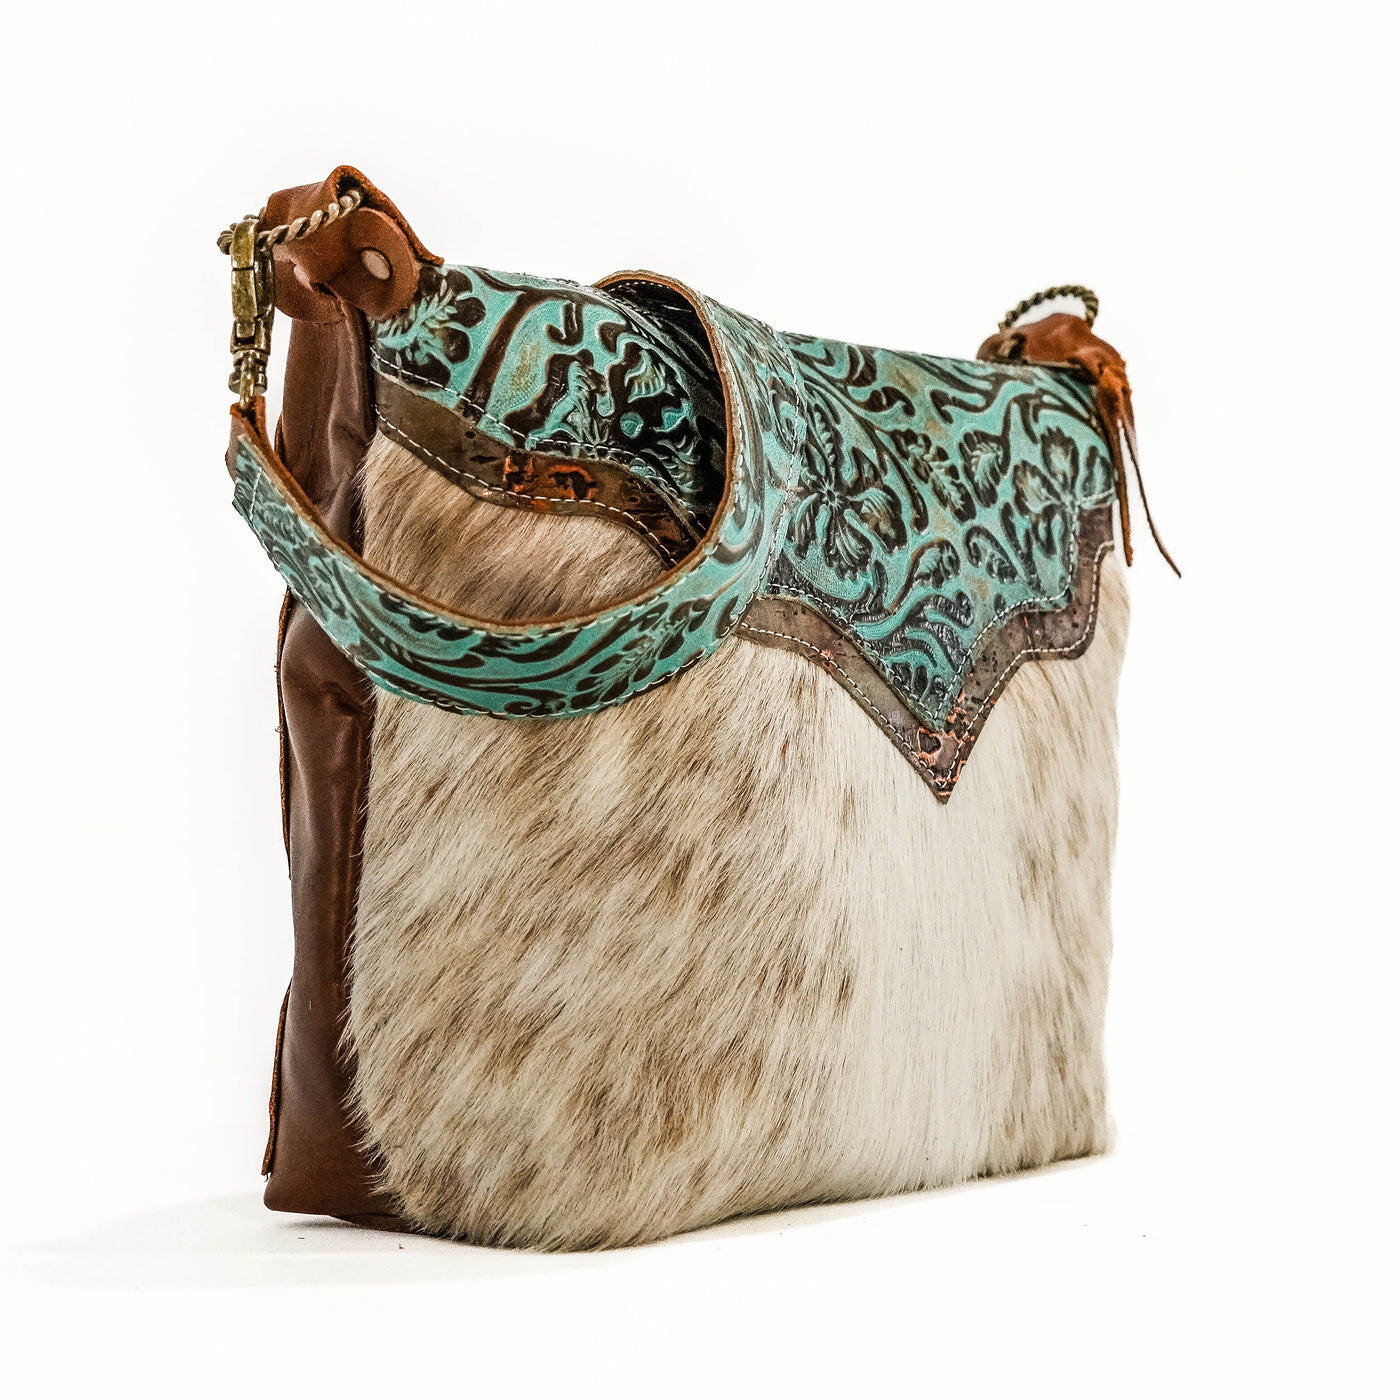 Annie - Fuzzy Longhorn w/ Turquoise Tool-Annie-Western-Cowhide-Bags-Handmade-Products-Gifts-Dancing Cactus Designs